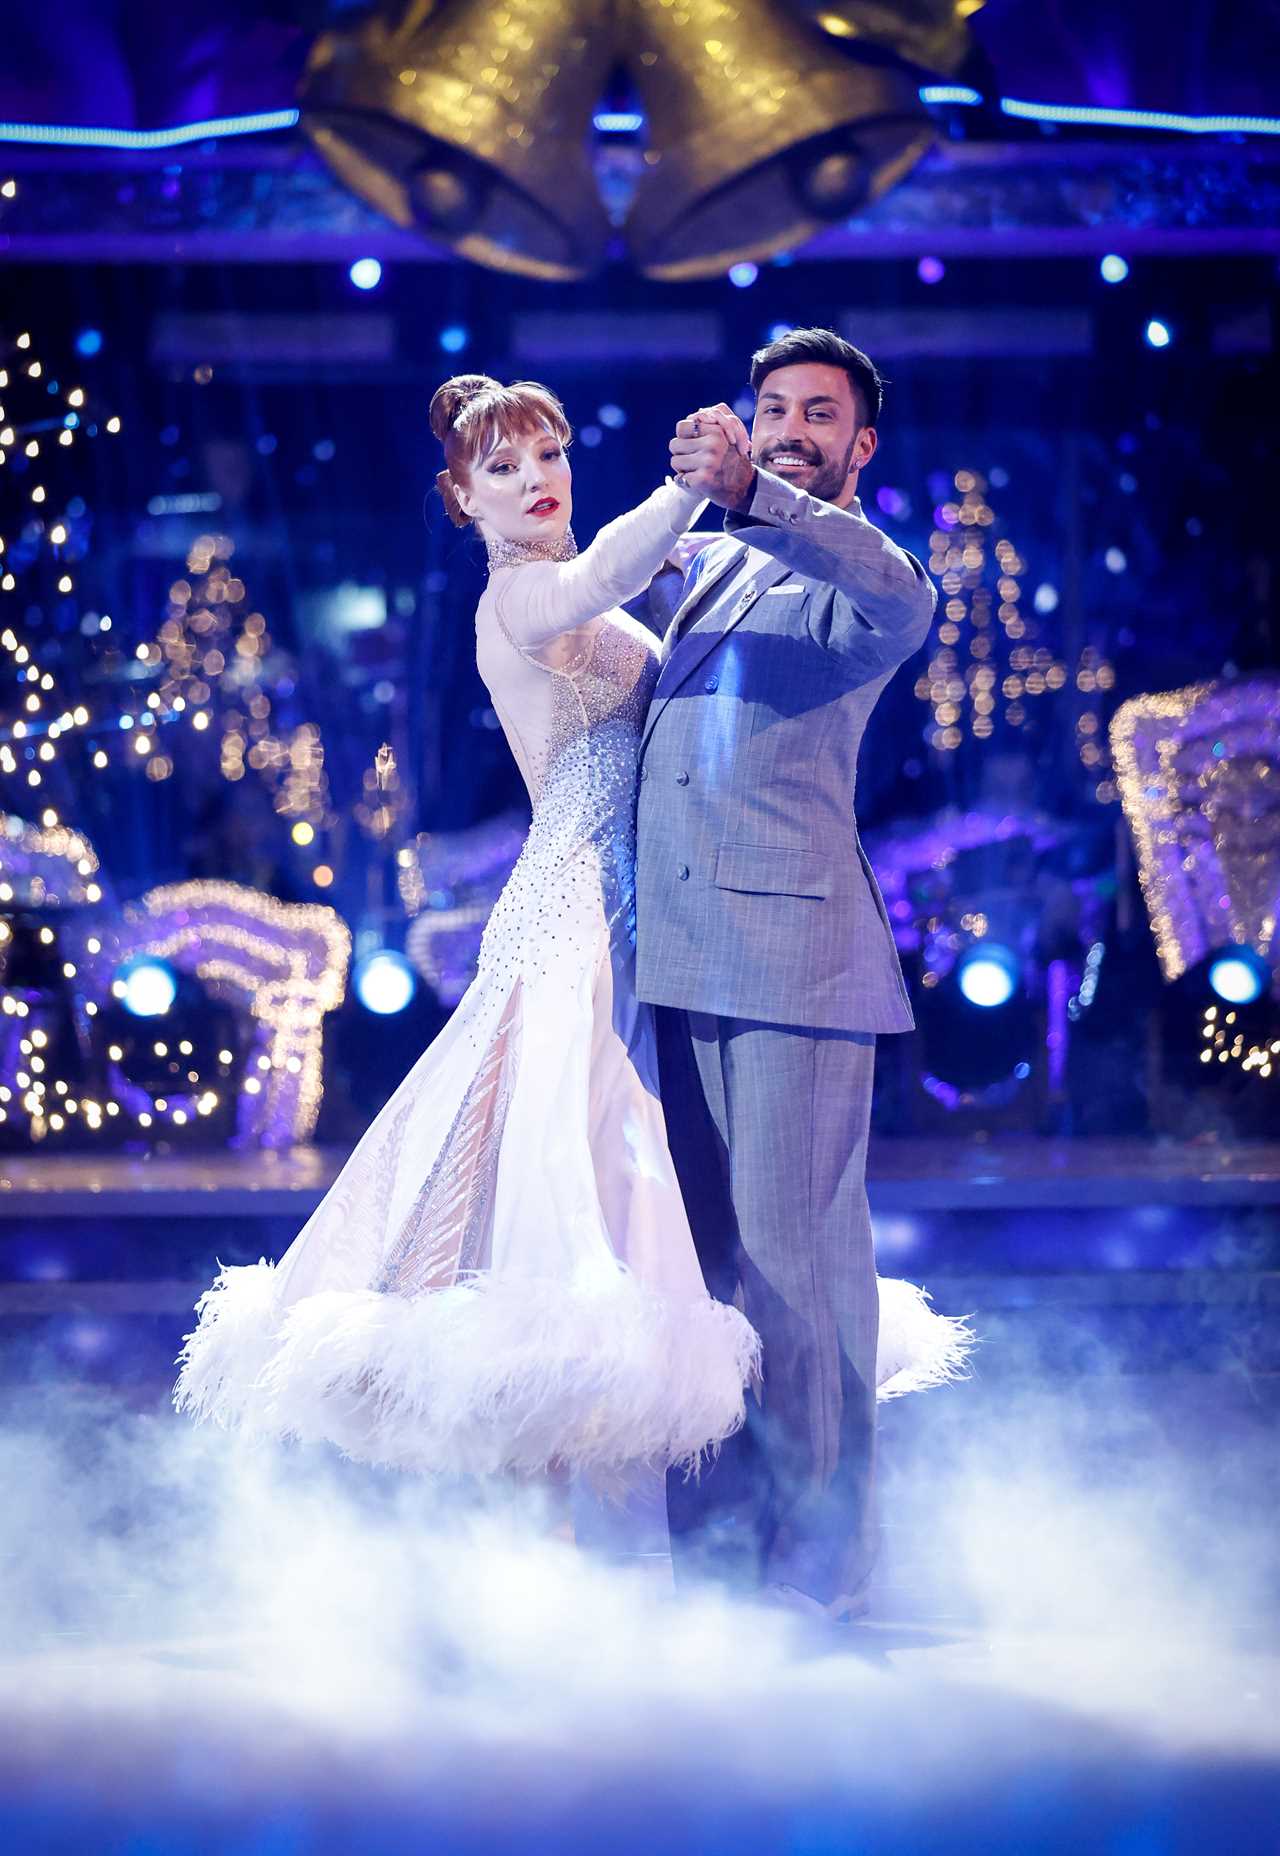 Strictly Come Dancing star ‘set for main series’ say fans after stunning judges on Christmas special